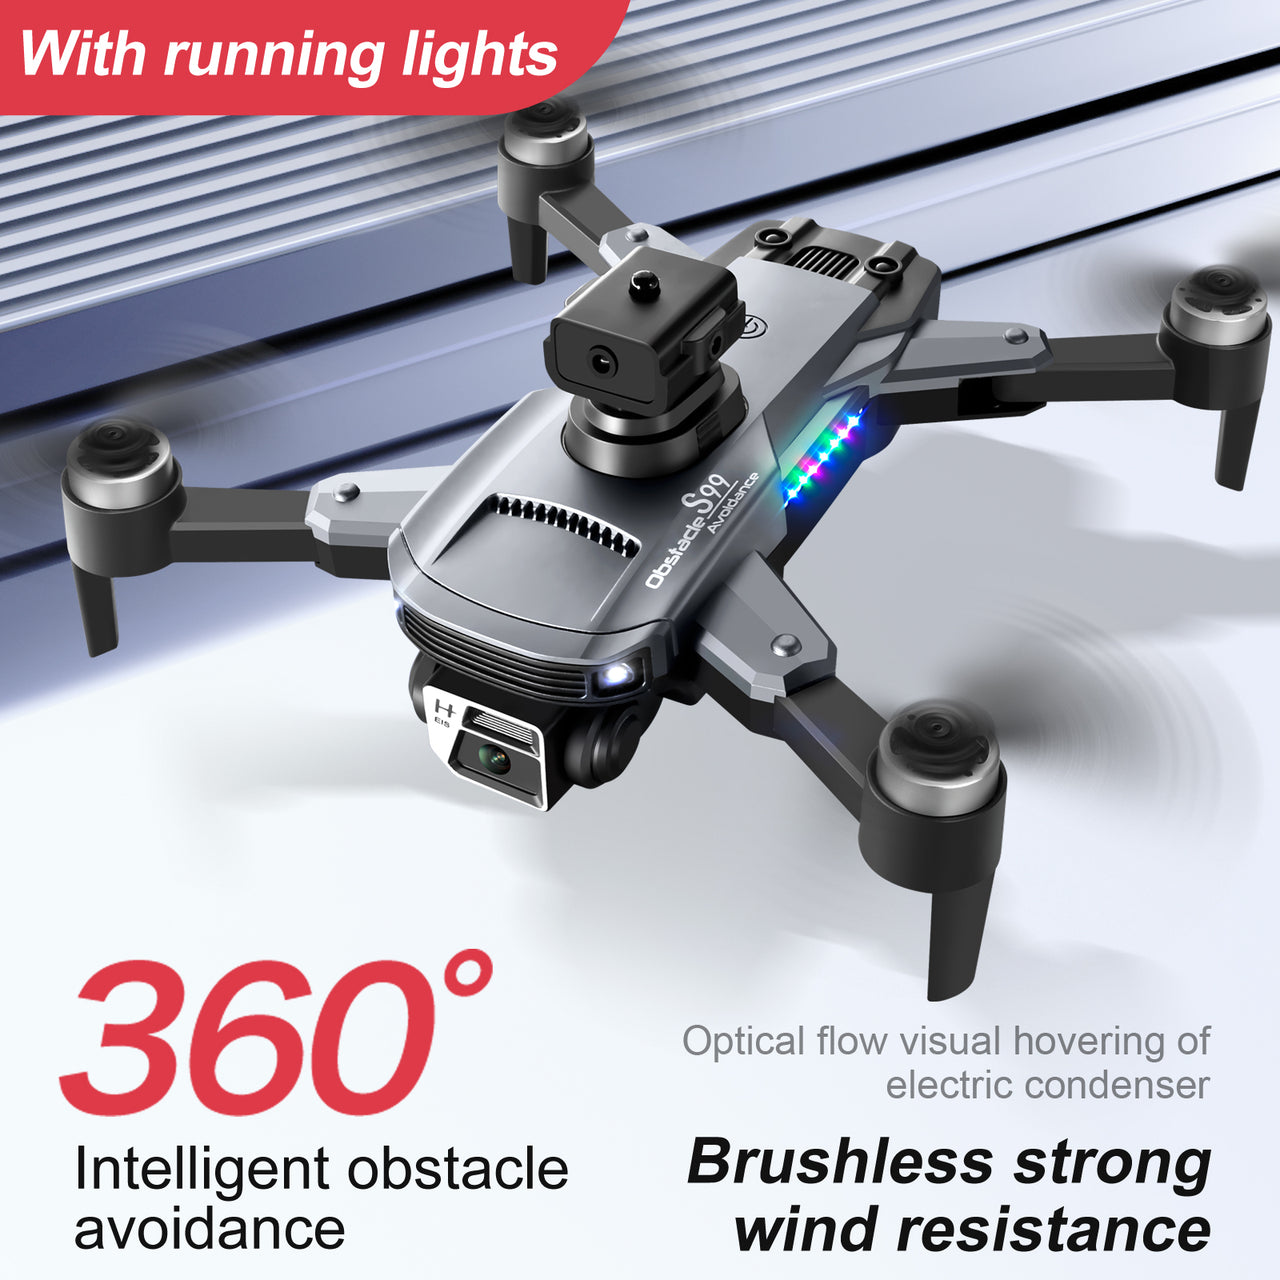 S99 Drone 4K Brushless Remote Control Aircraft